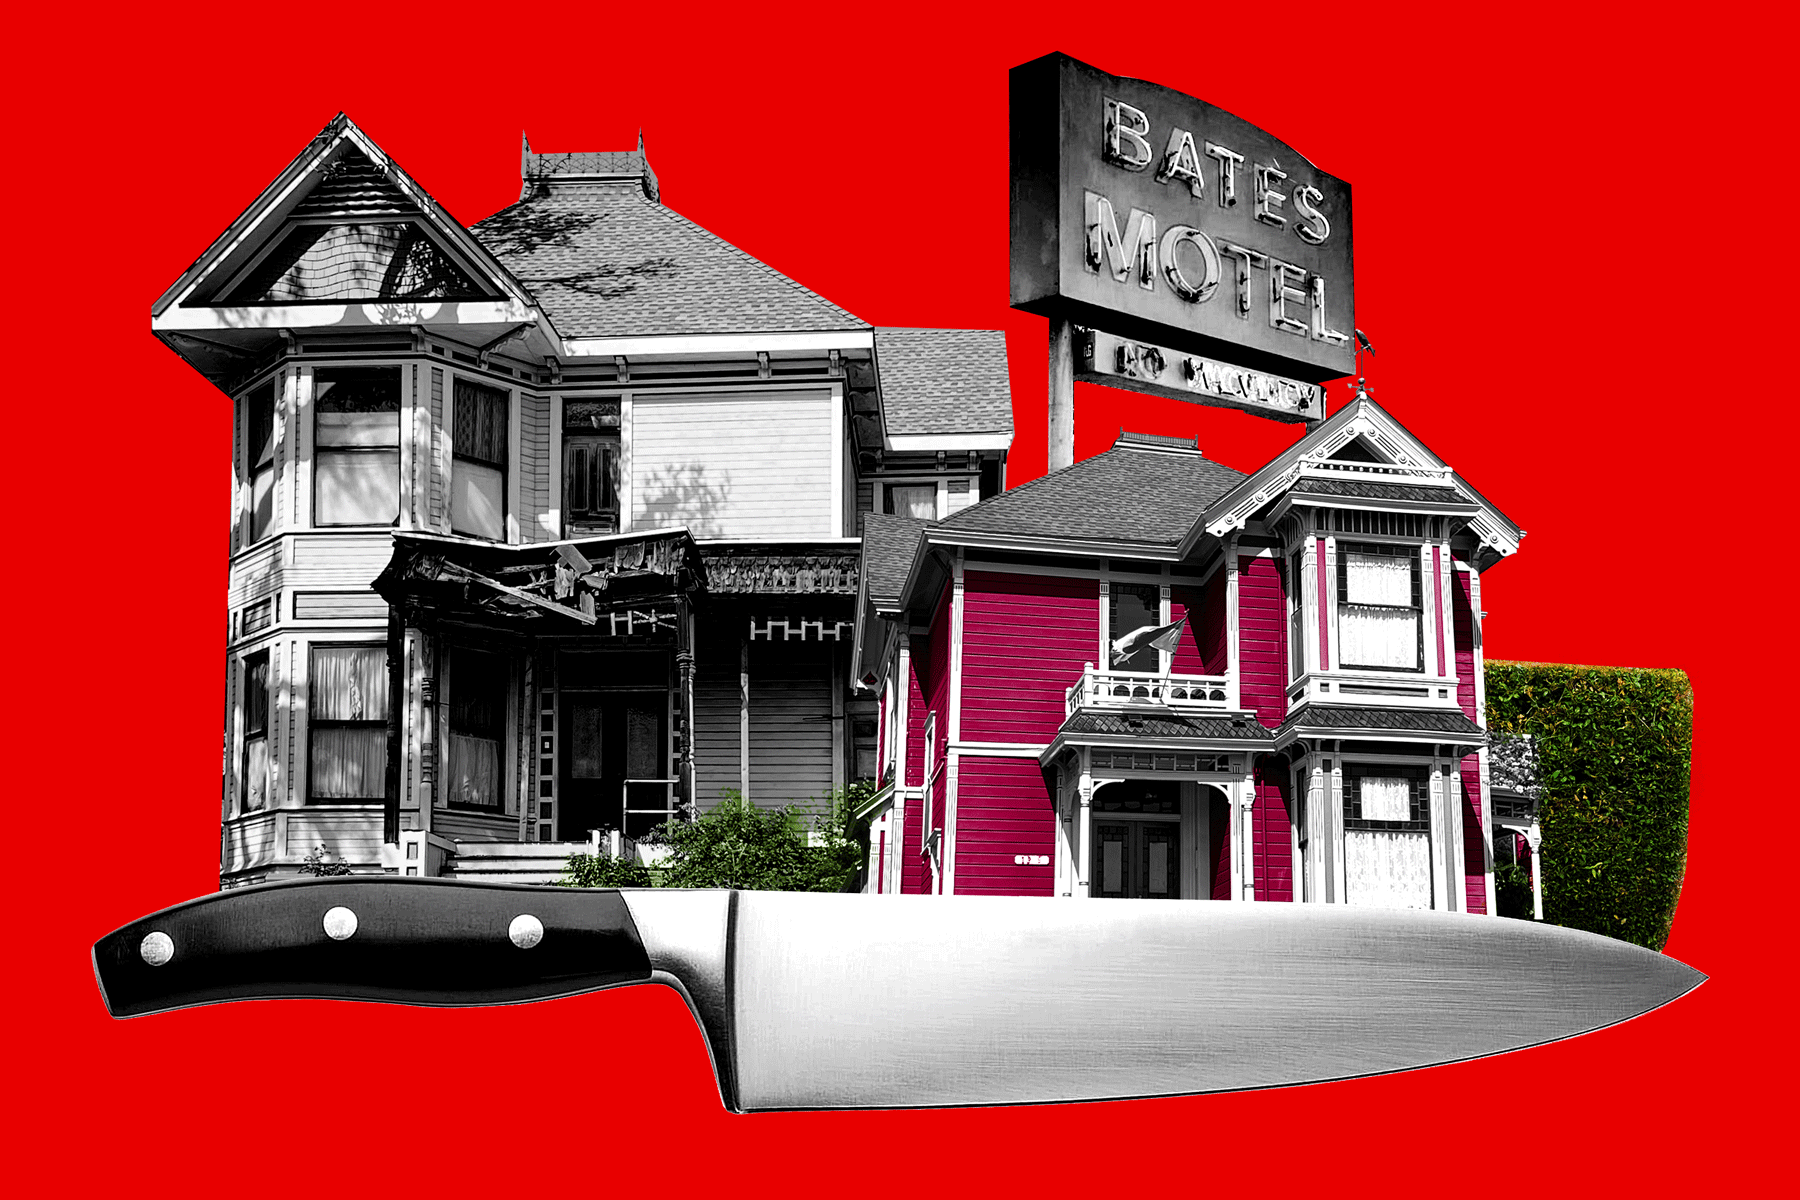 A photo collage of houses from the list with a blinking Bates Motel sign and a large knife.